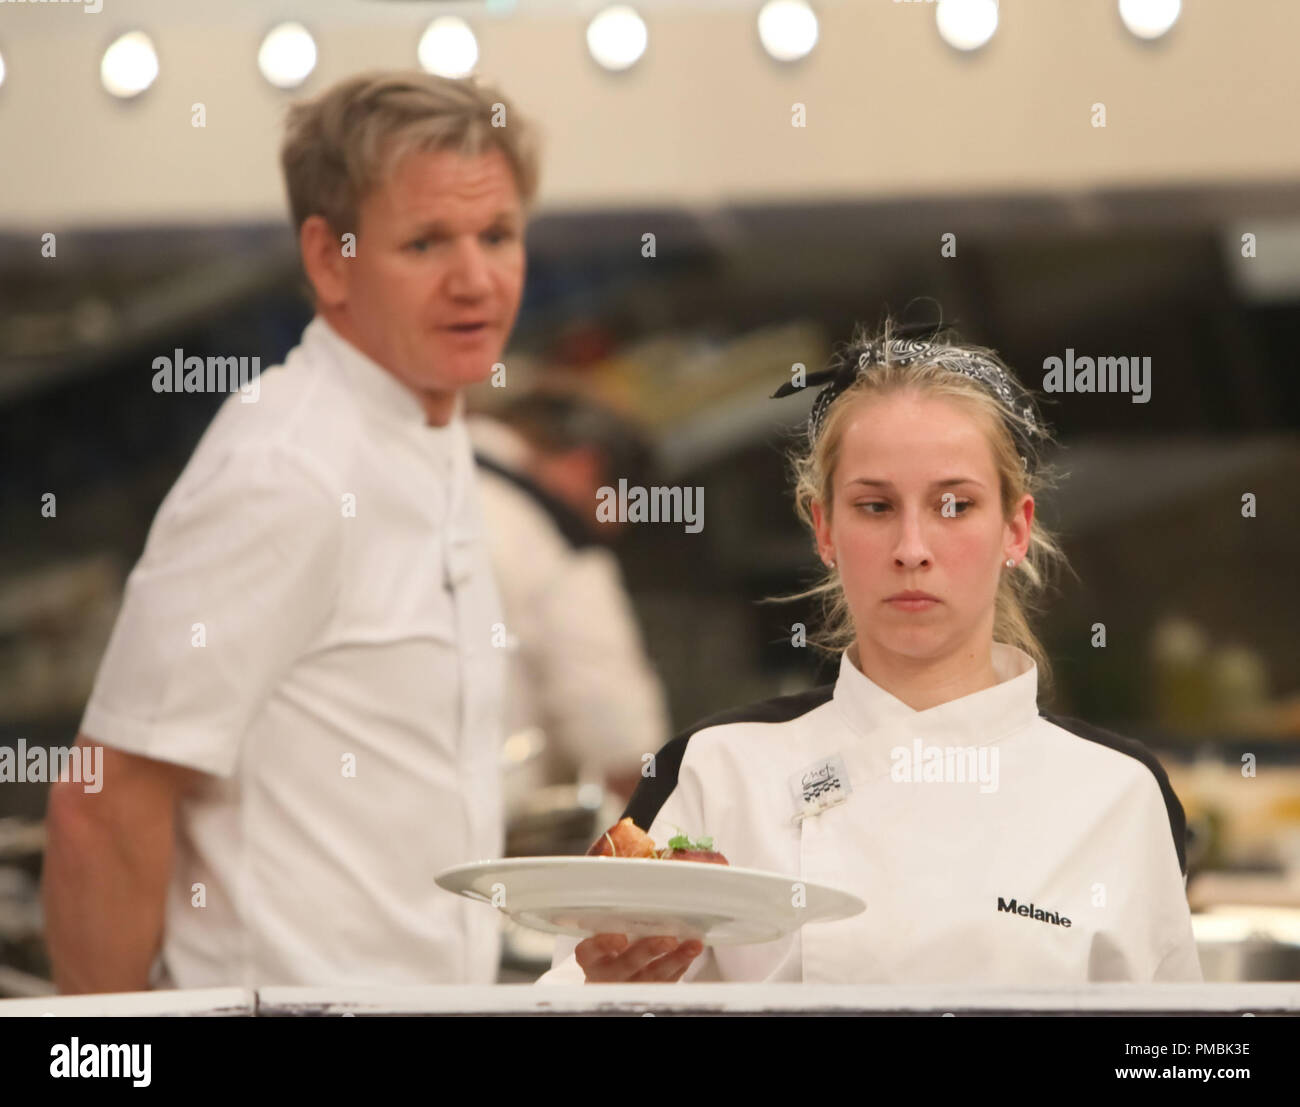 Hell S Kitchen L R Chef Ramsay And Contestant Melanie During Dinner Service In 4 Chefs Compete Episode Of Hell S Kitchen Stock Photo Alamy